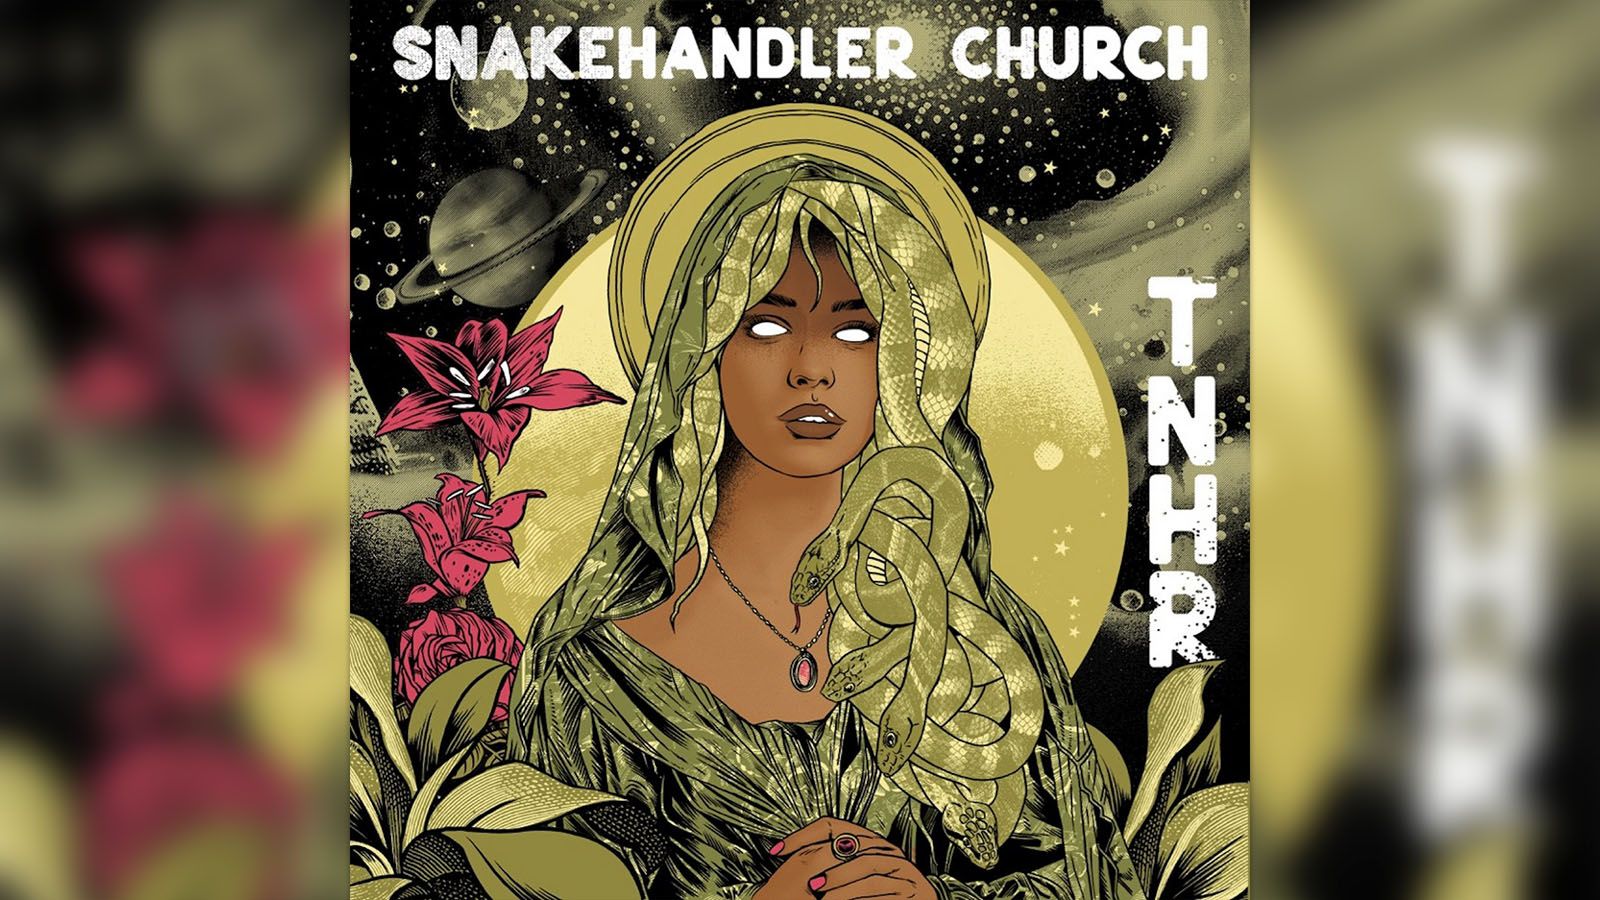 Snakehandler Church hit all the hard-rocking notes on Top Notch Heavy Rock.